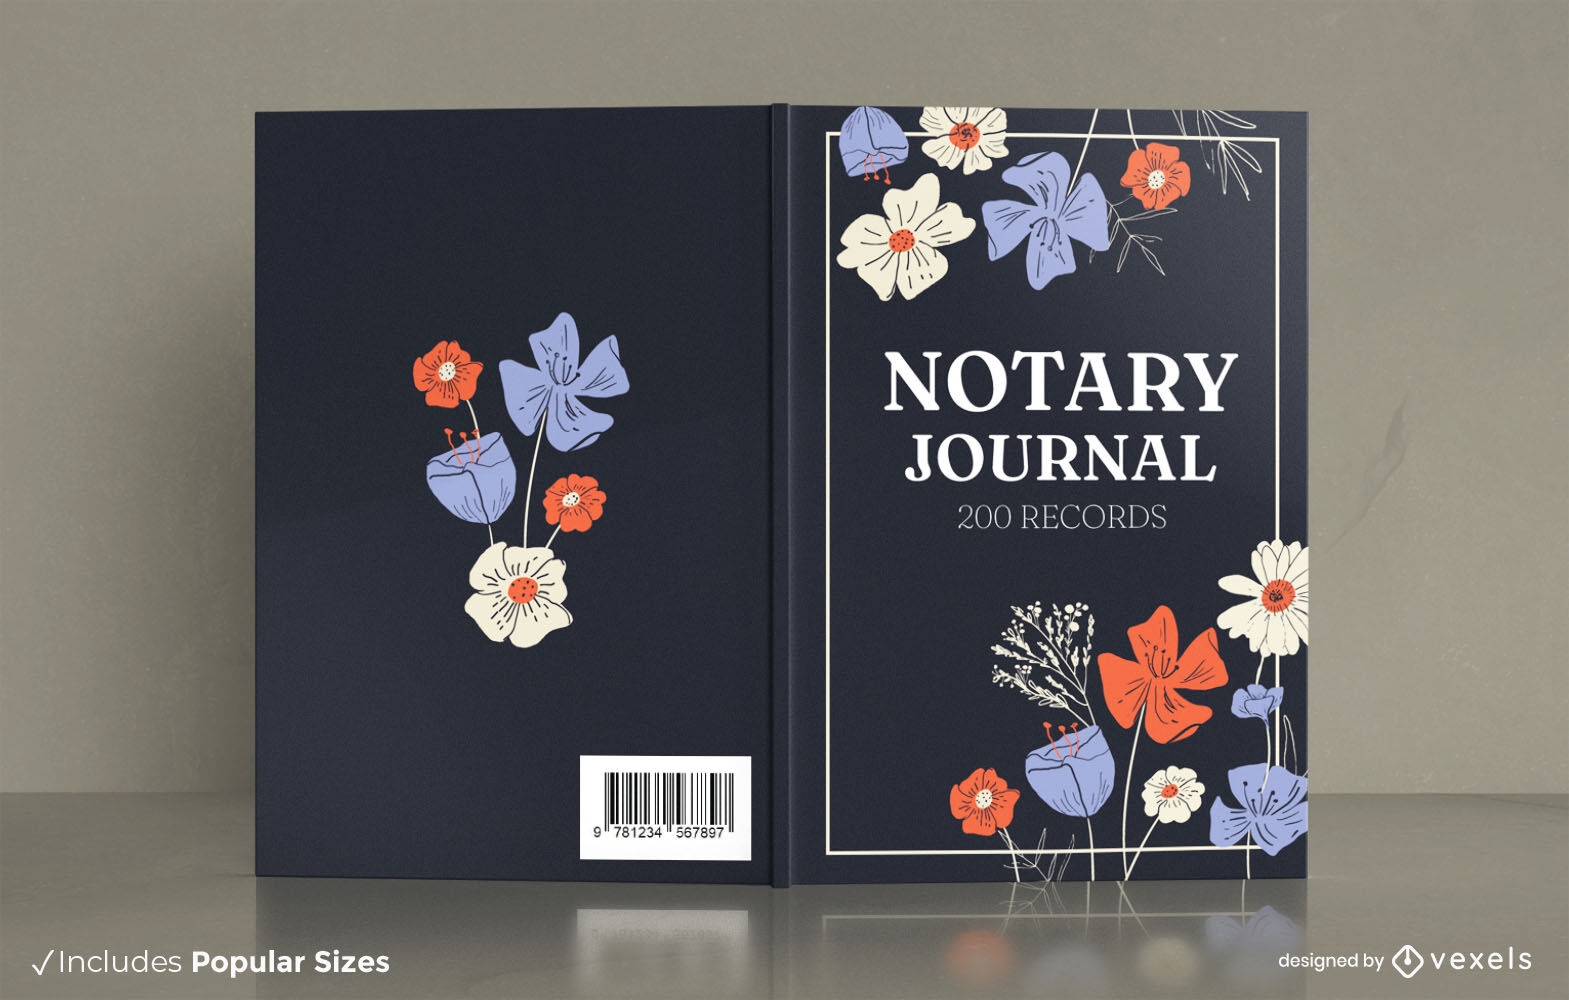 Floral notary journal book cover design